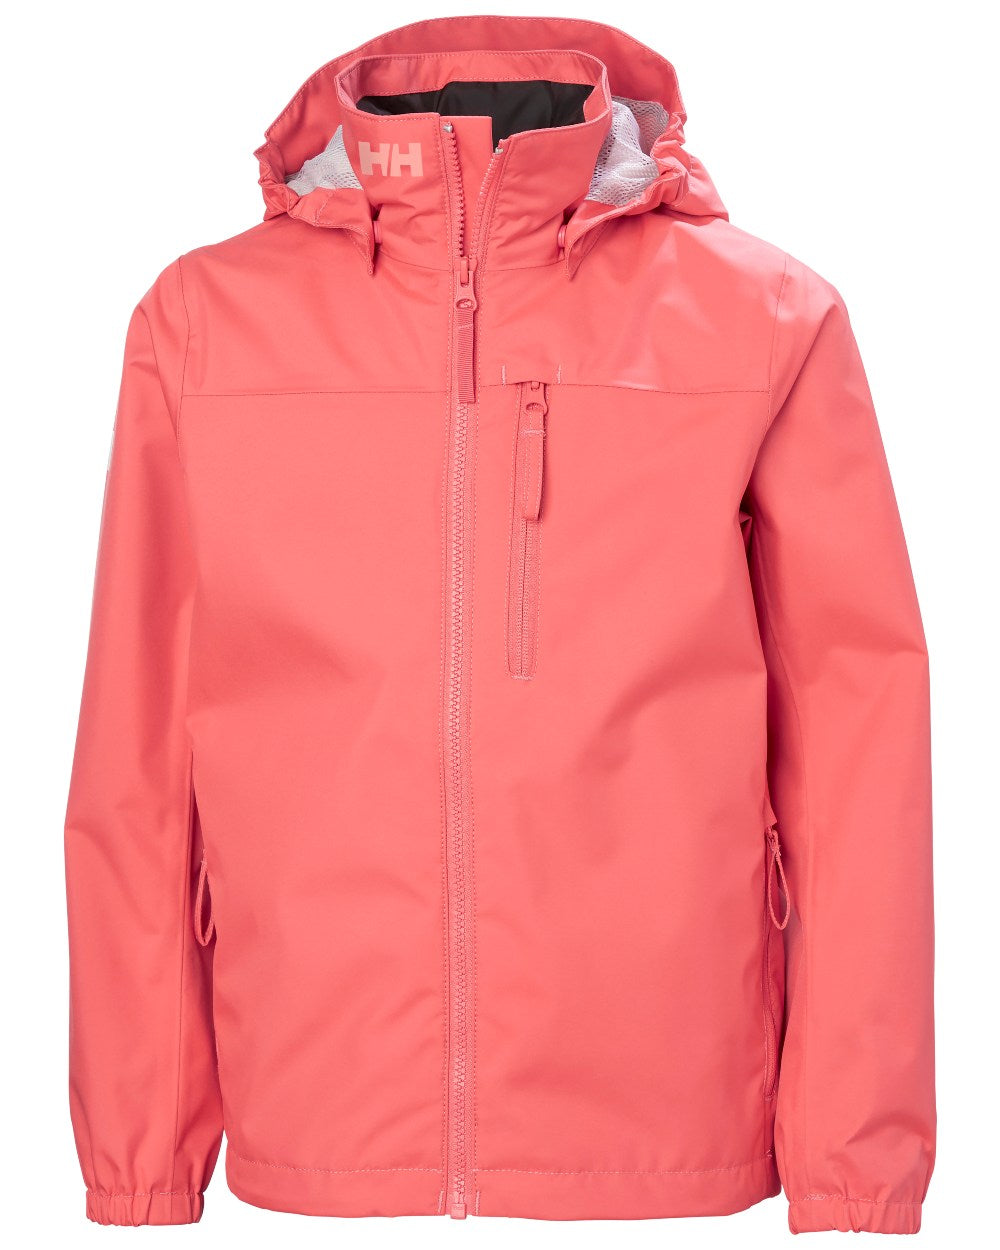 Sunset Pink Coloured Helly Hansen Childrens Crew Hooded Jacket On A White Background 